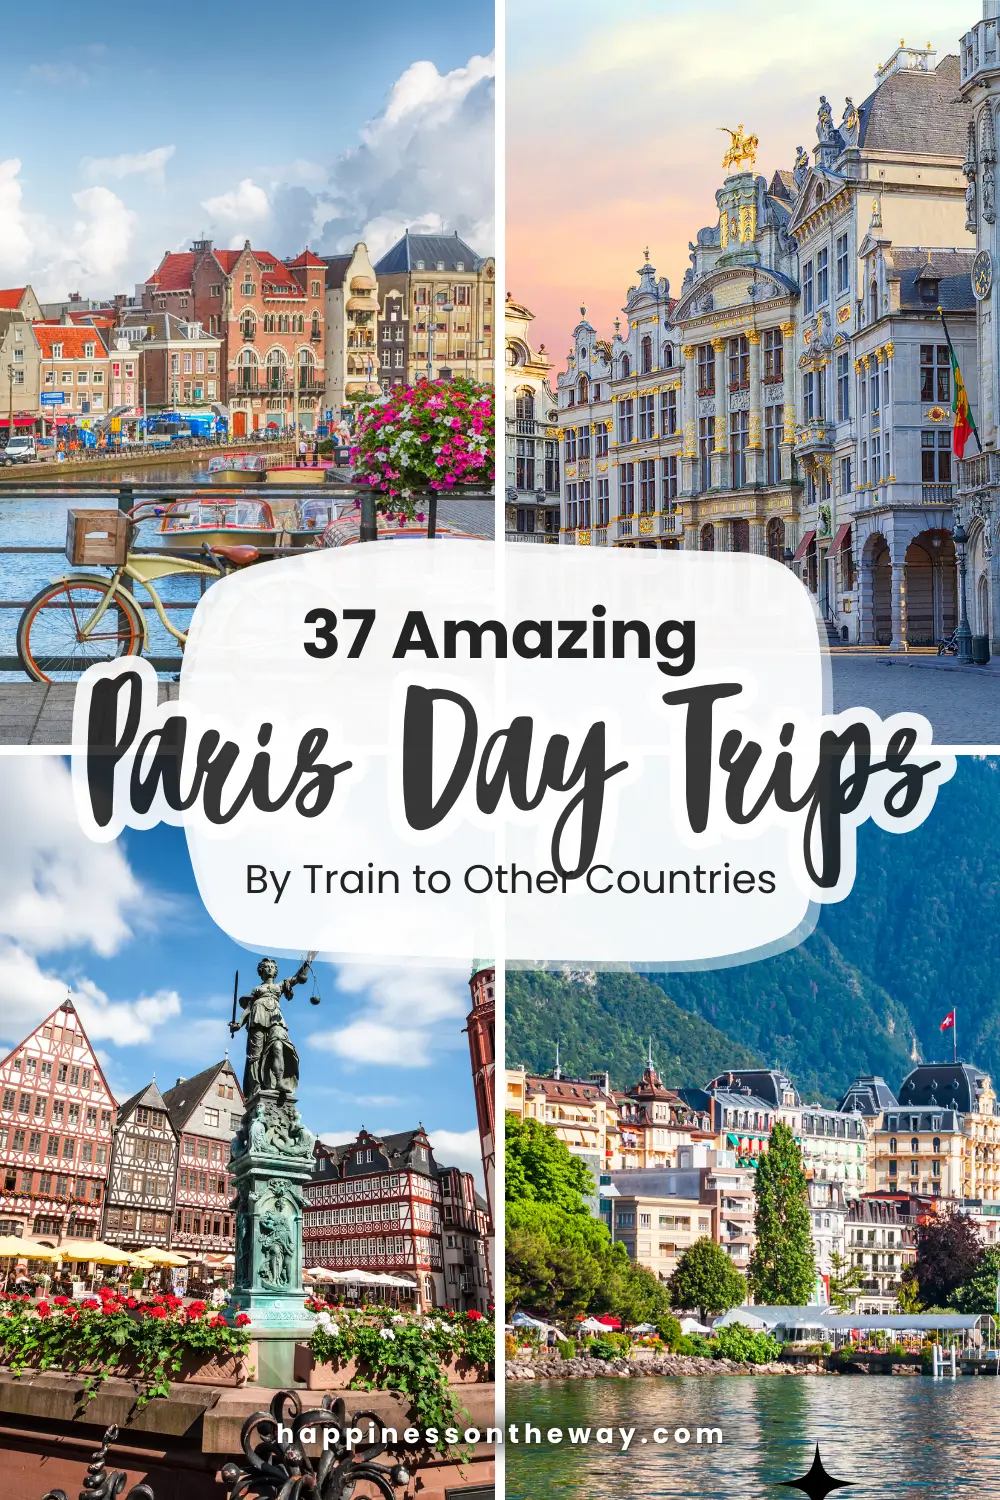 The 37 Amazing Day Trips from Paris by Train to Other Countries featuring scenic views of European architecture and landscapes. The top-left image displays colorful buildings by a canal in Amsterdam, Netherlands, the top-right shows grand historical buildings with golden statues in Hague Netherlands, the bottom-left highlights traditional half-timbered houses and a statue at Frankfurt, Germany, and the bottom-right presents a lakeside view with mountains in Geneva, Switzerland.